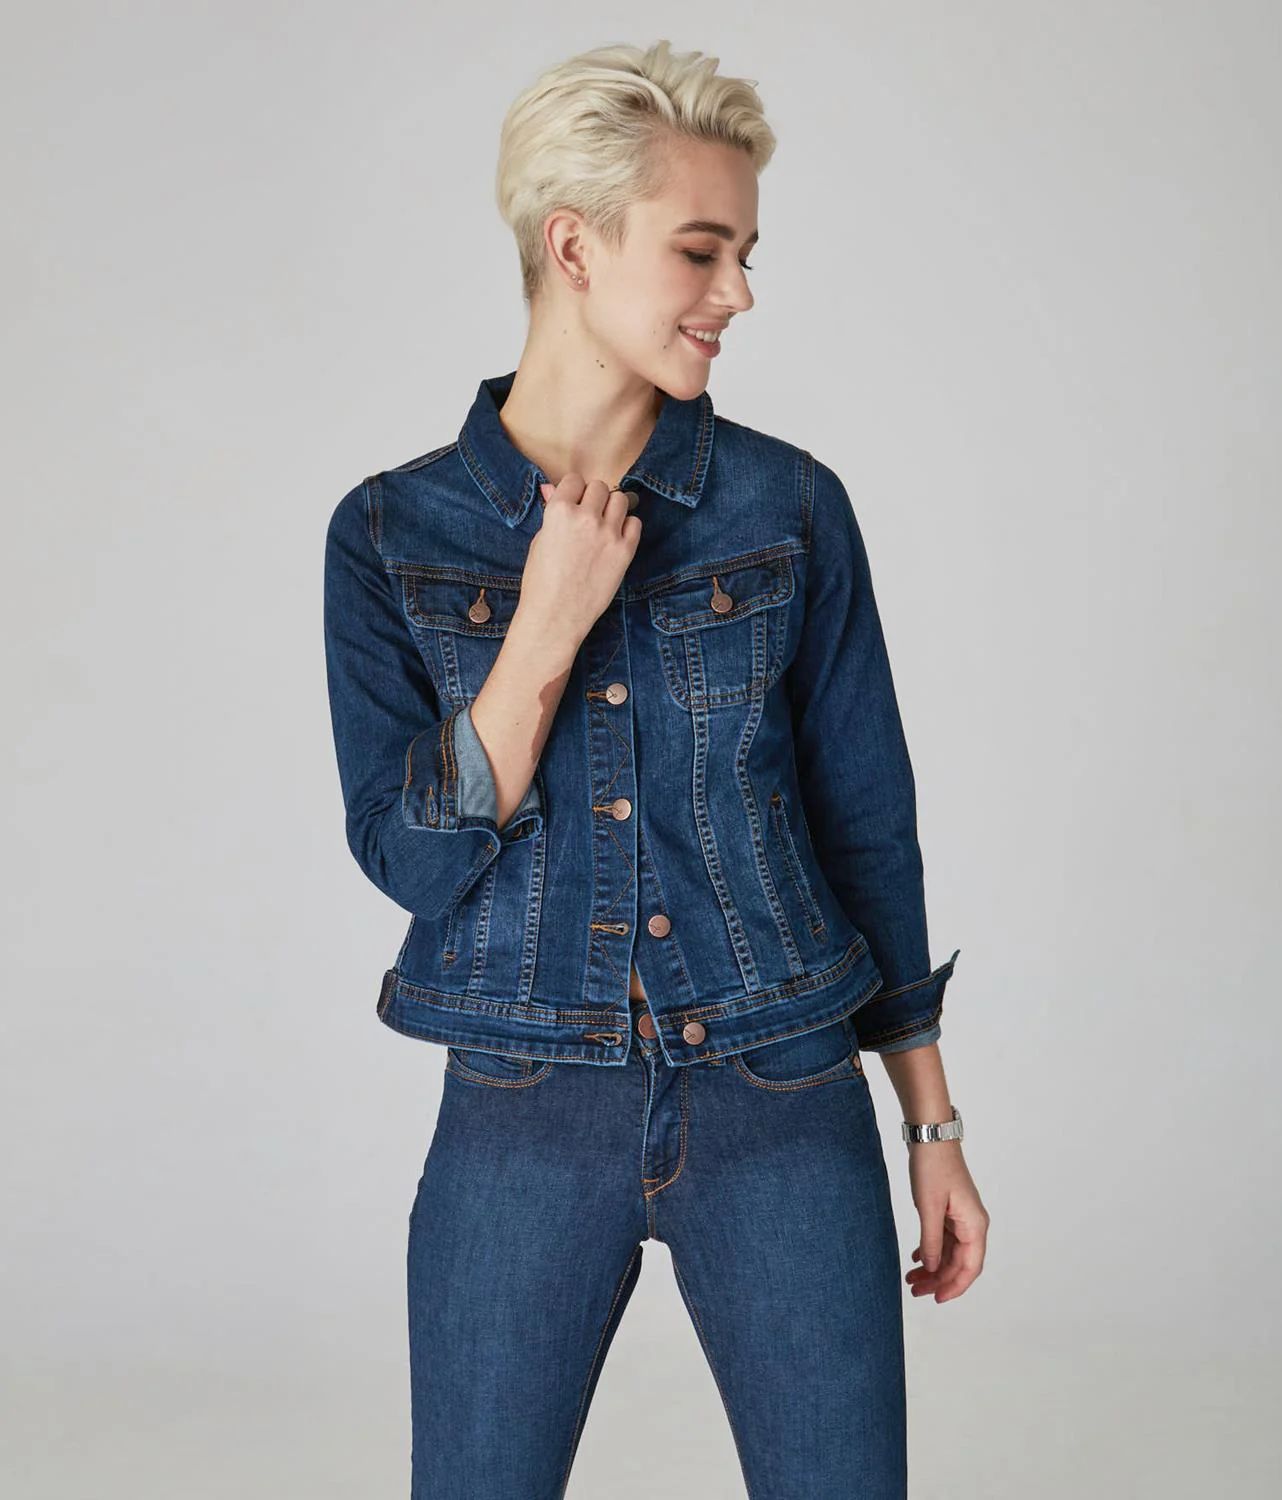 Lola Jeans Women's Denim Jacket in Cool Starry Night XS Lord & Taylor | Lord & Taylor